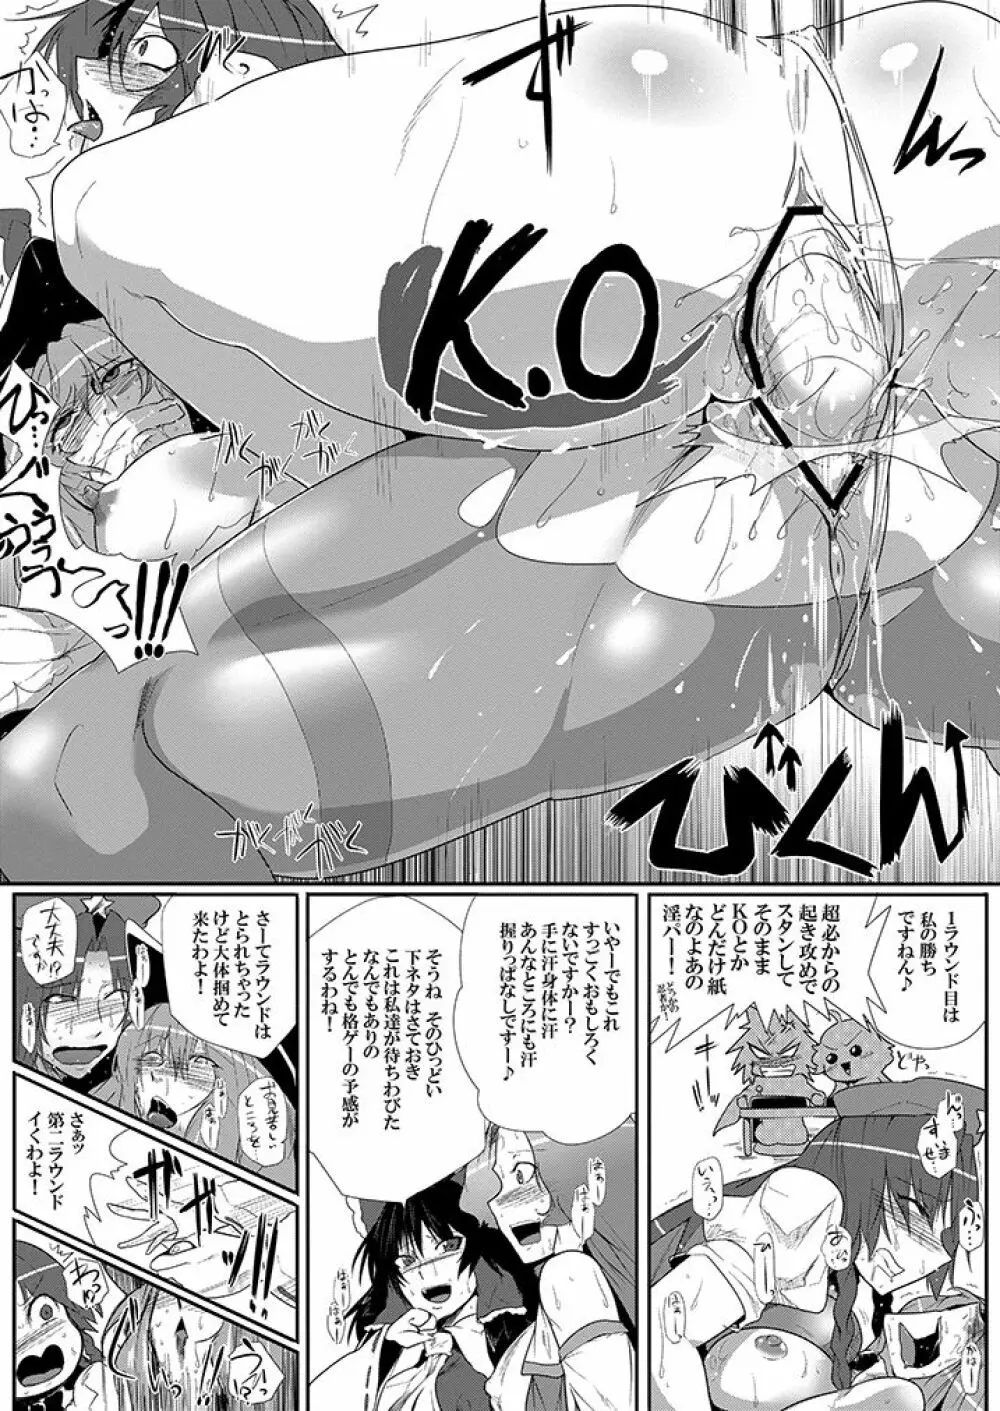 SAKUYA MAID in HEAVEN/ALL IN 1 - page397